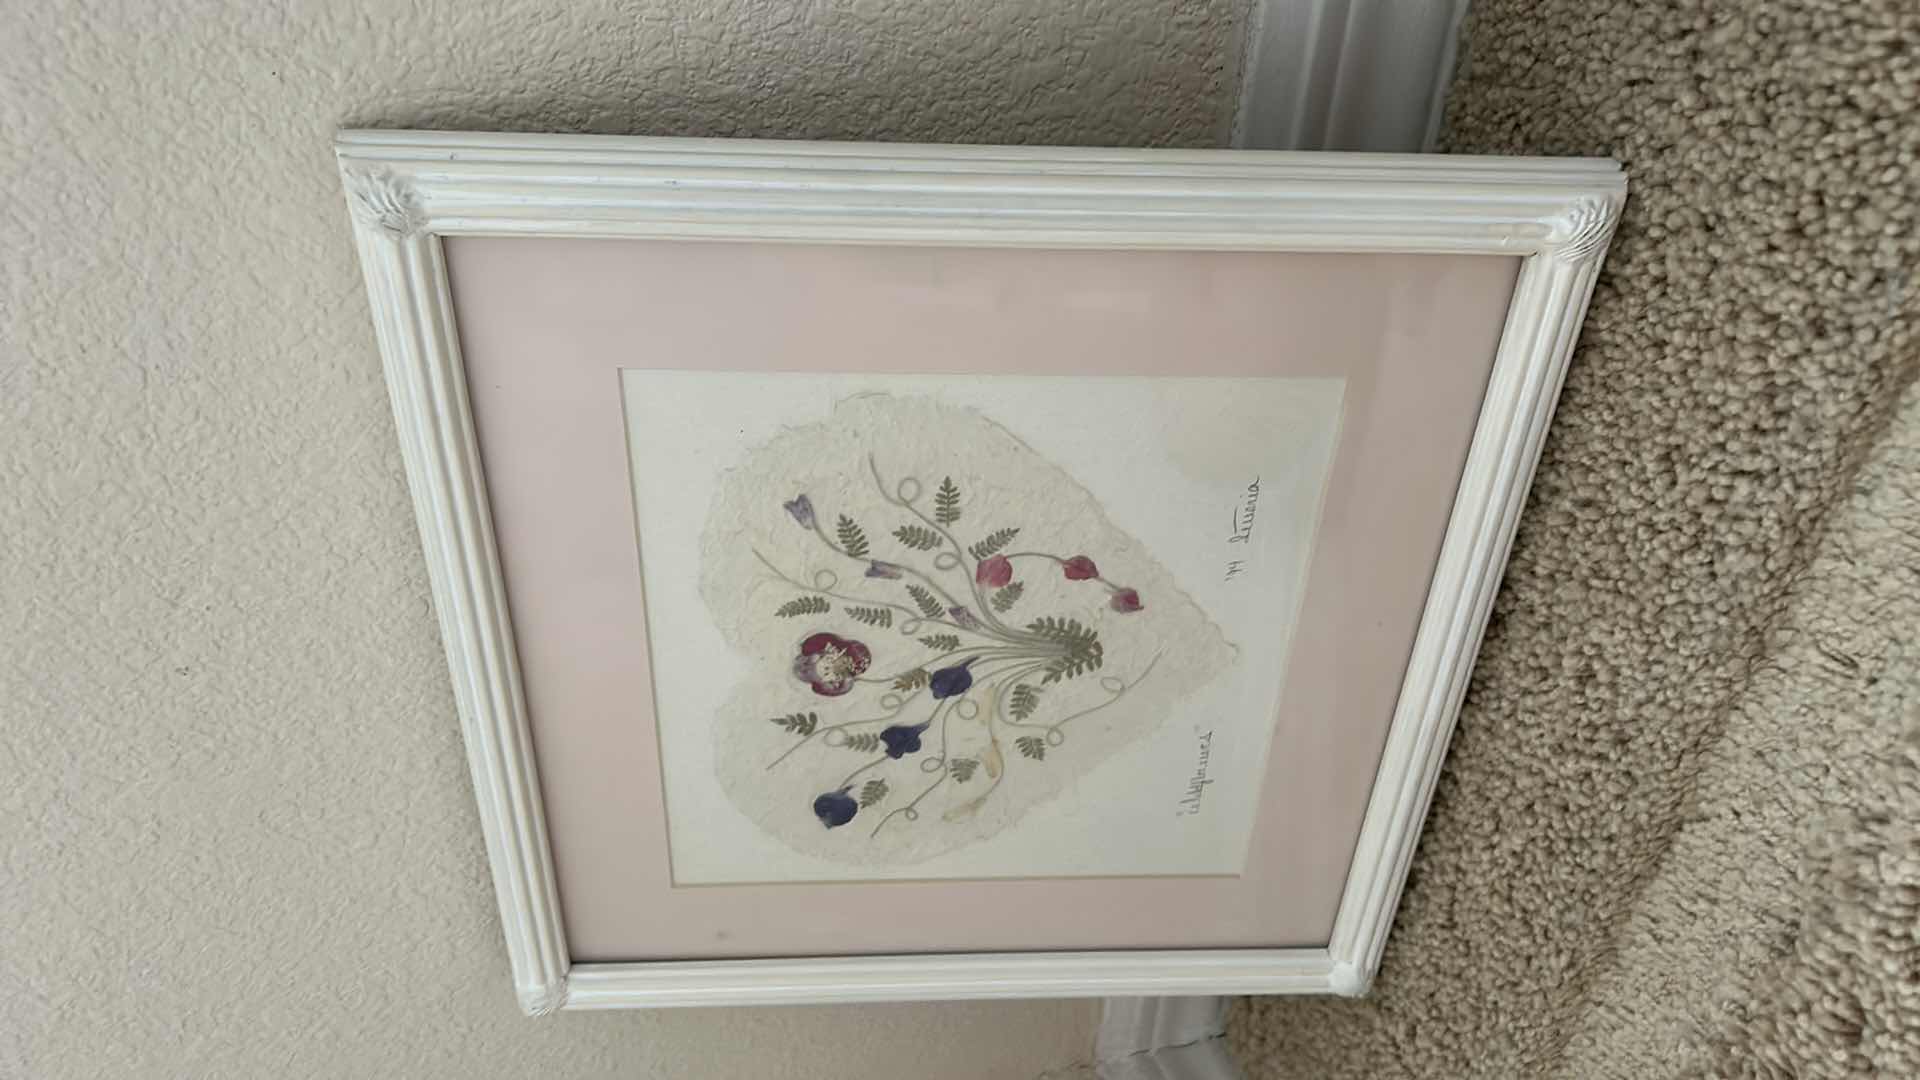 Photo 3 of "Wildflowers" signed pressed flower heart artwork framed 11“ x 11“